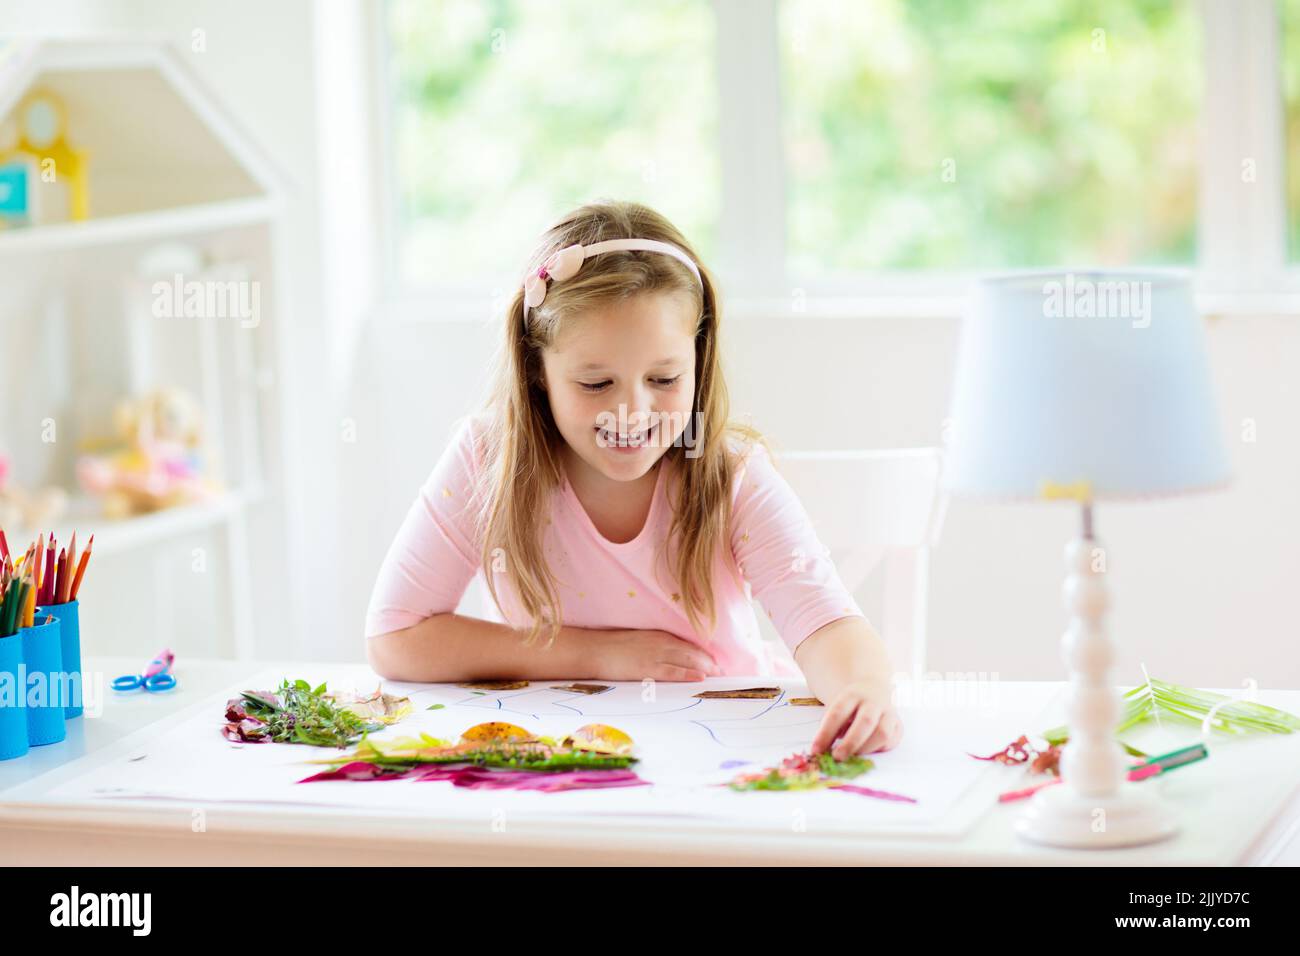 Child creating picture with colorful leaves. Art and crafts for kids. Little girl making collage image with rainbow plant leaf. Stock Photo